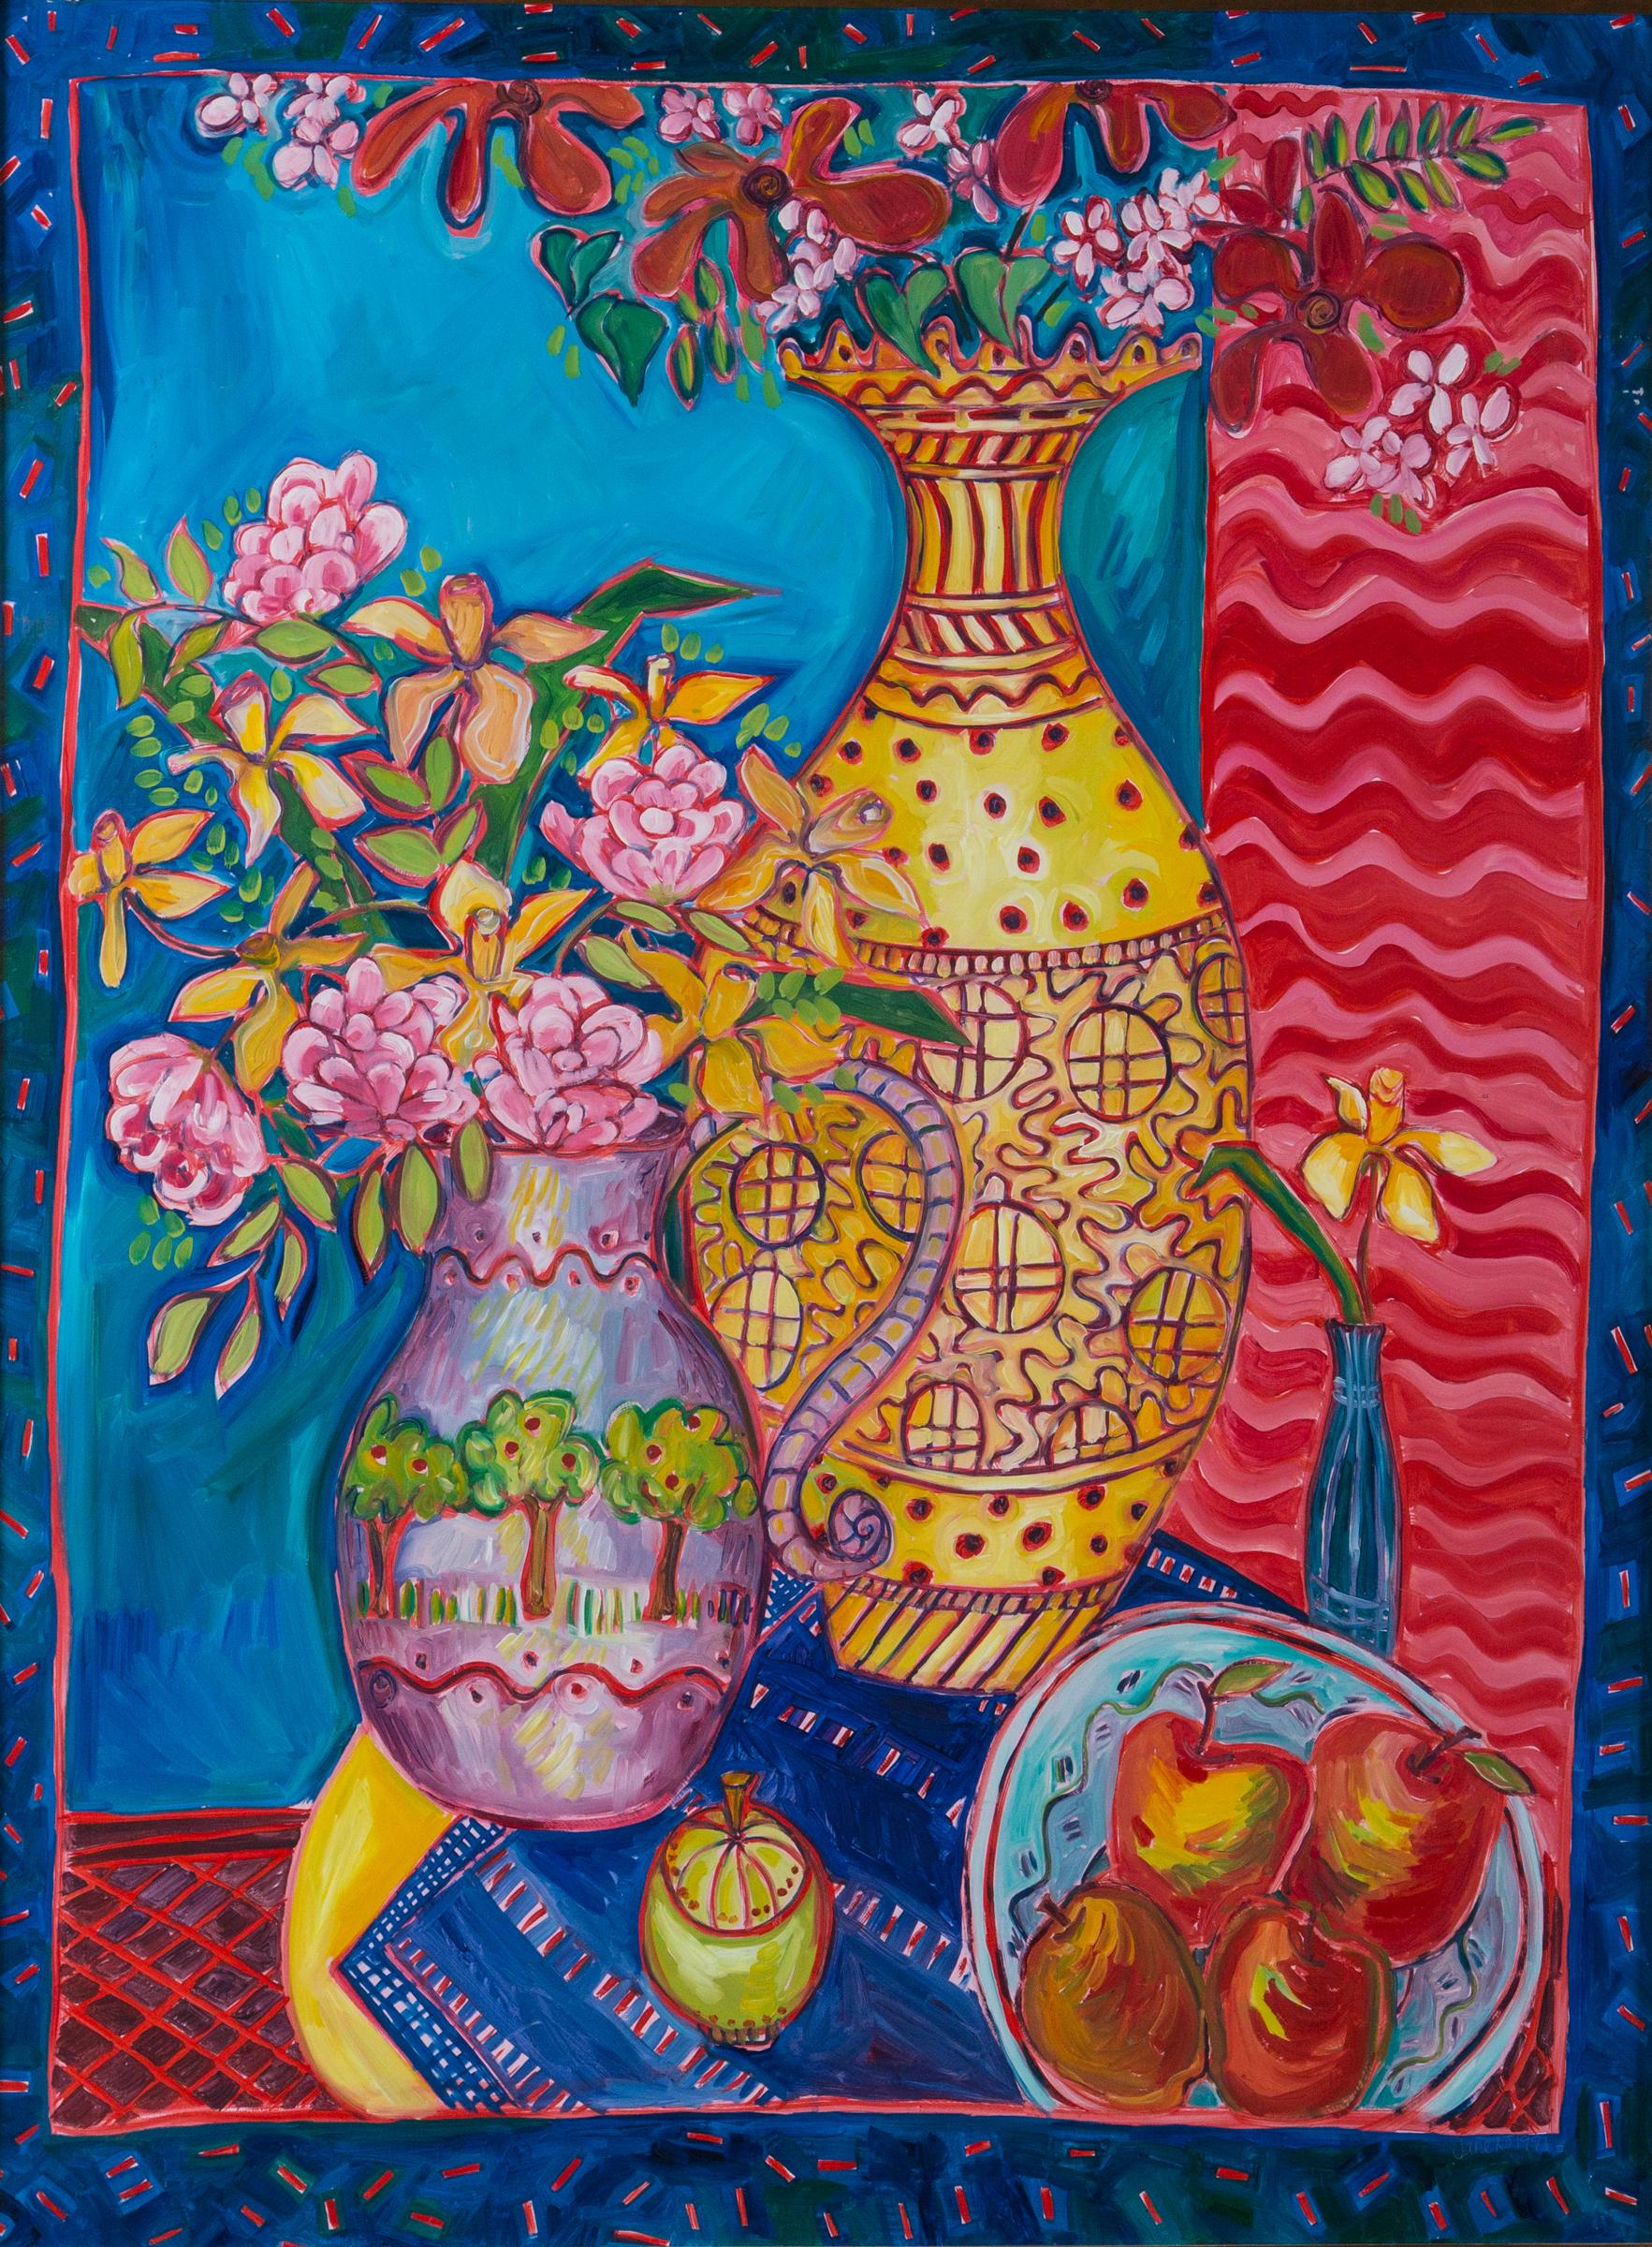 Colorful still life painting by artist Jane Kewin, Ottawa, Canada. Yellow, blue, red, pink. Turquoise colors.
Created in 1991. Giltwood frame.